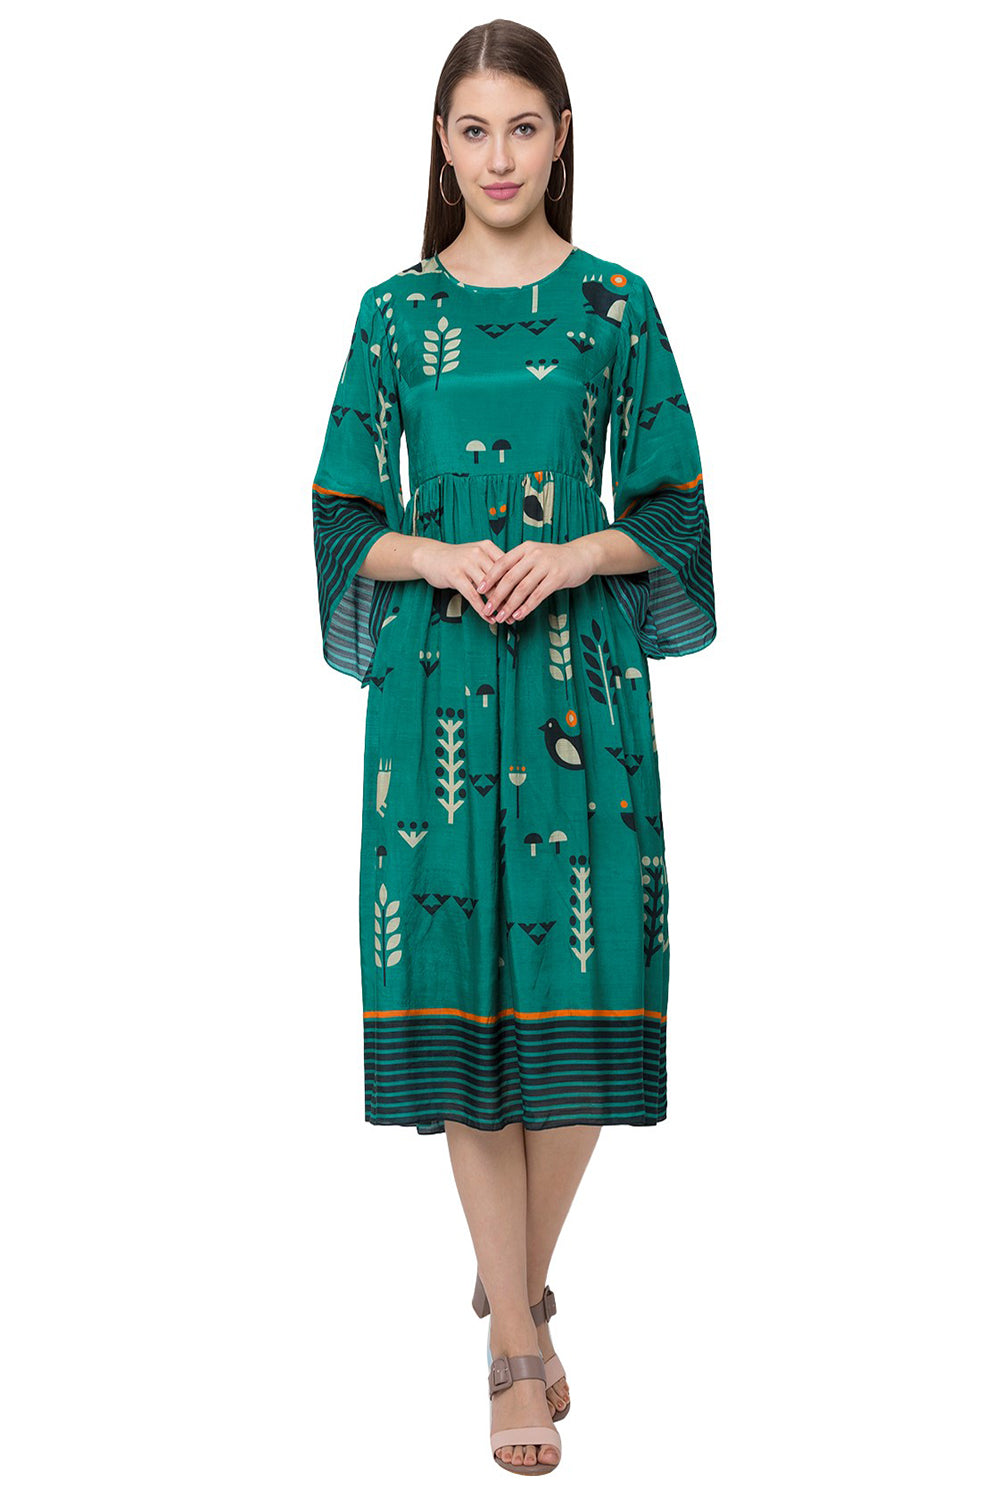 Bird Printed Dress With Waist Gathers And Bell Sleeves